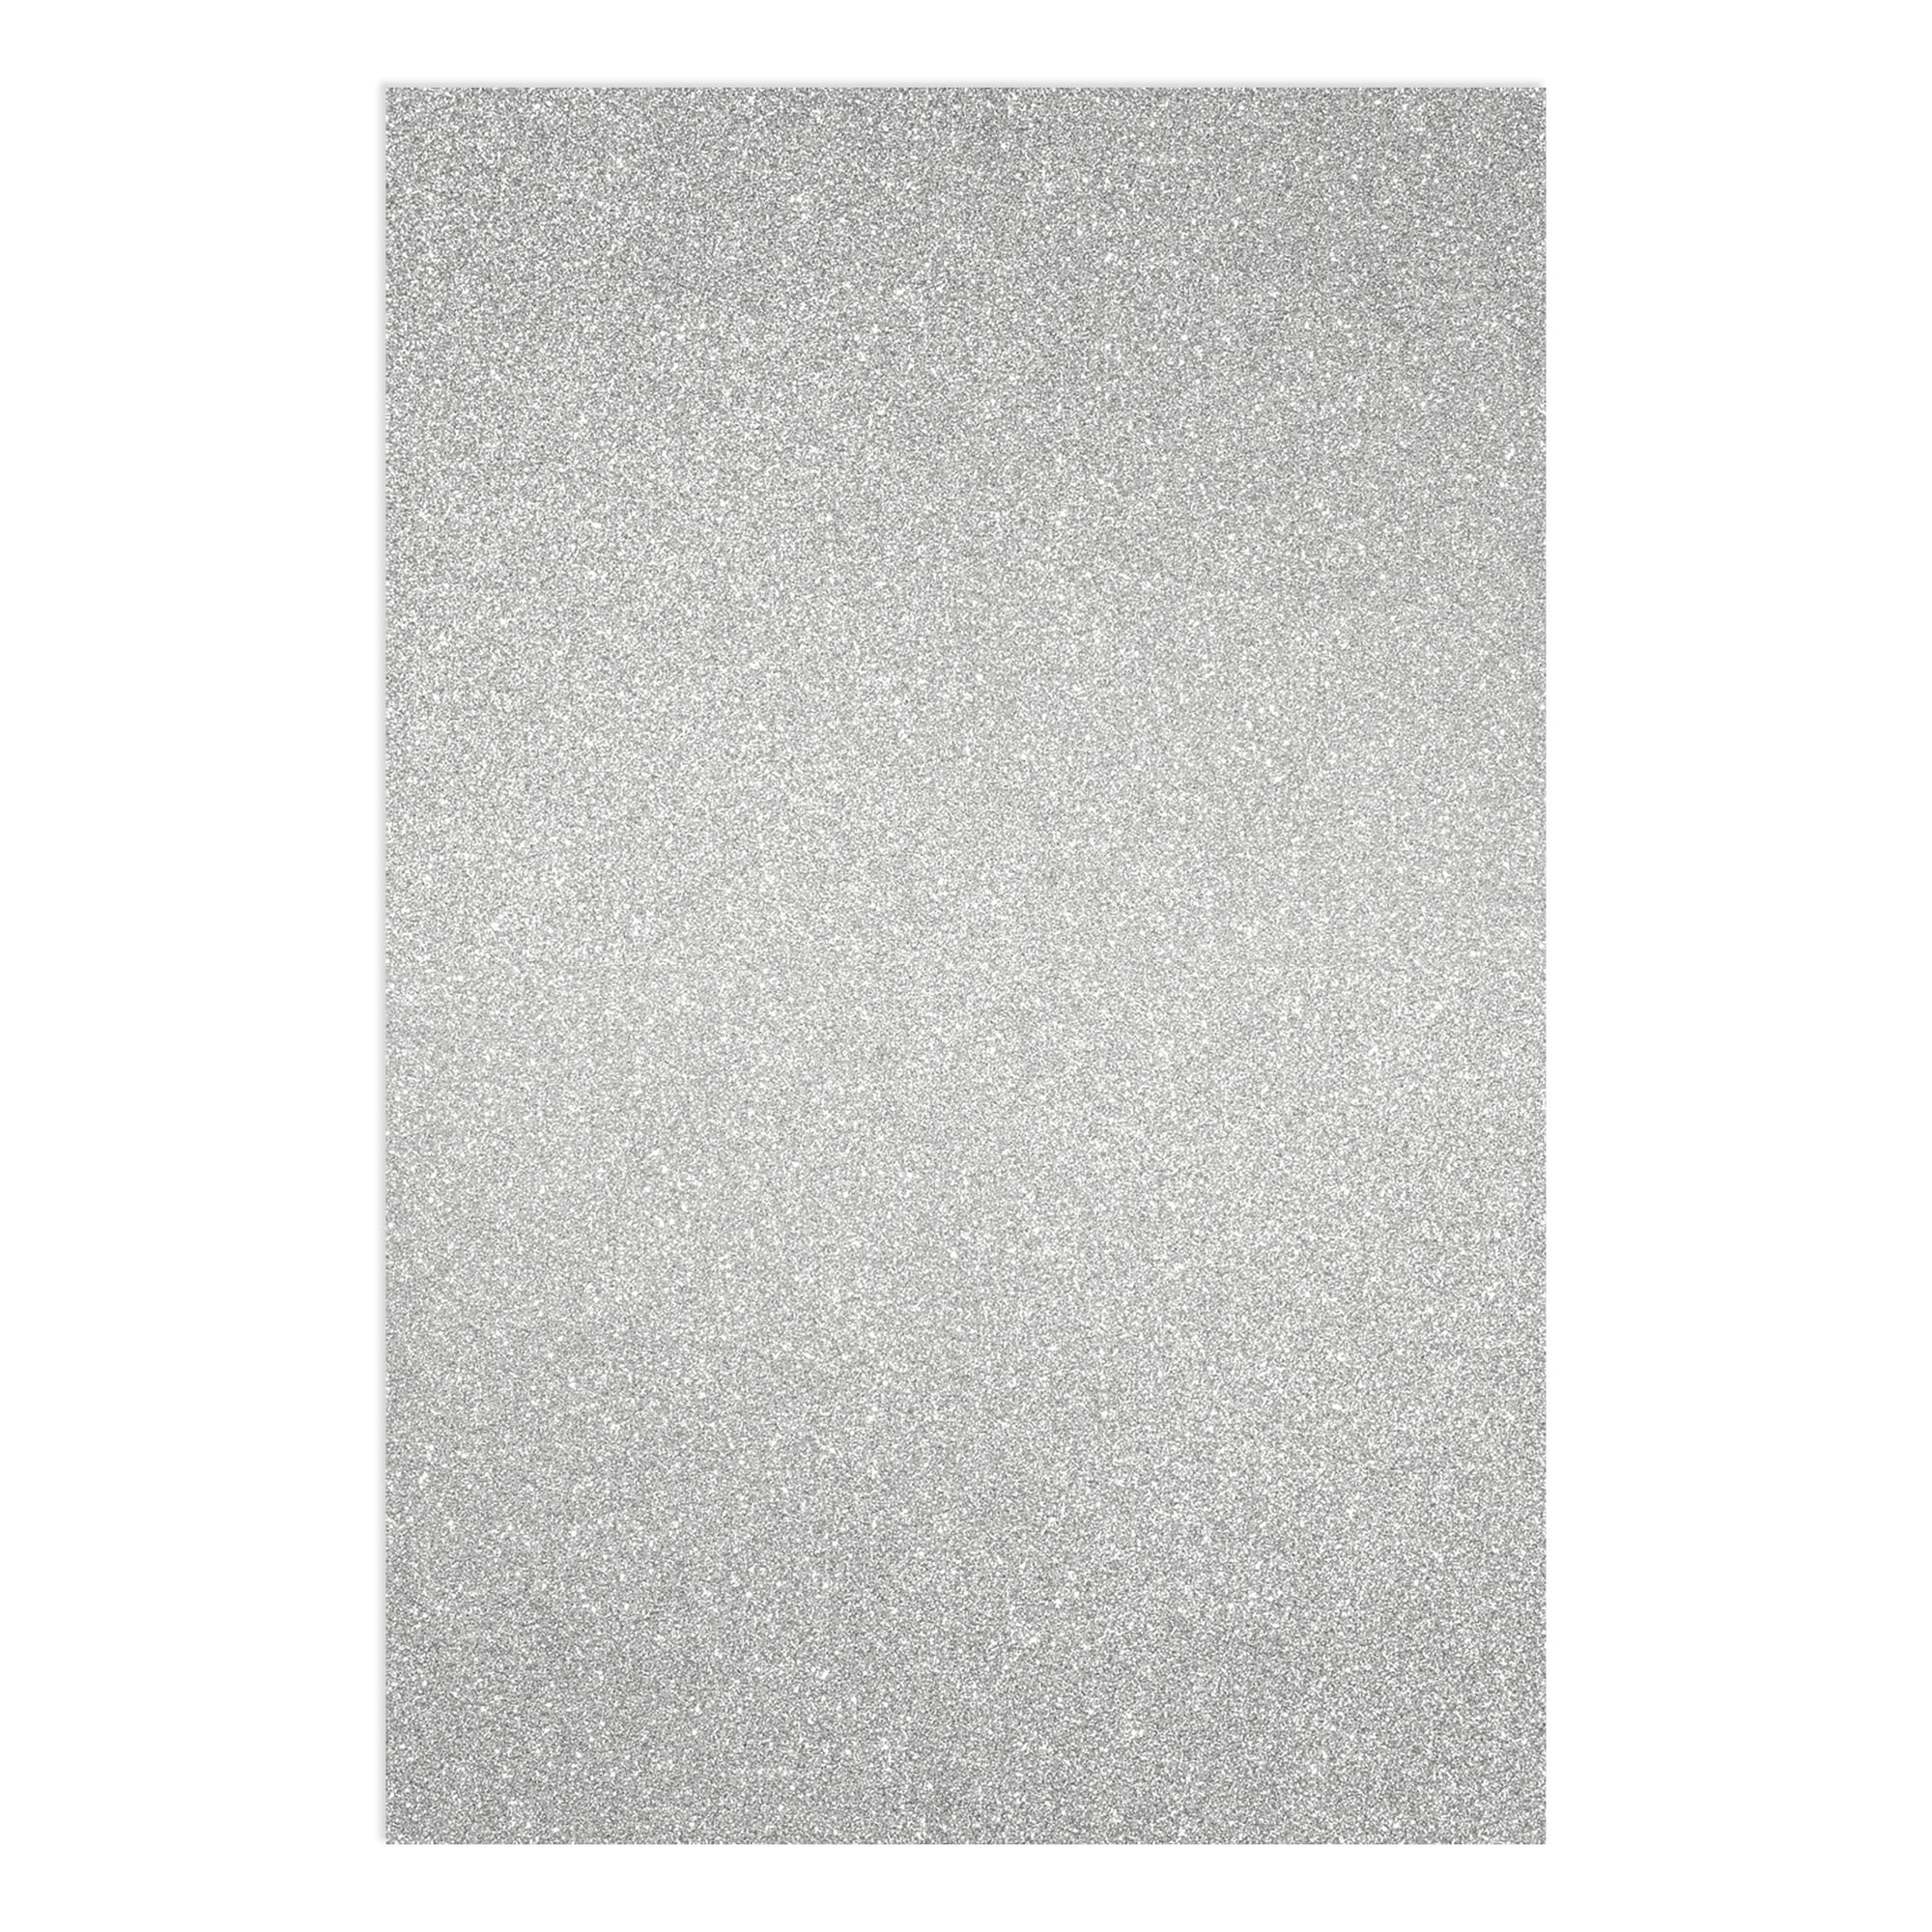 levylisa 10 Sheets 8 x 12 Glitter Card 250gms Premium Card Sparkling  Craft Cardstock Cardmaker DIY Gift Box Wrapping (Silver)